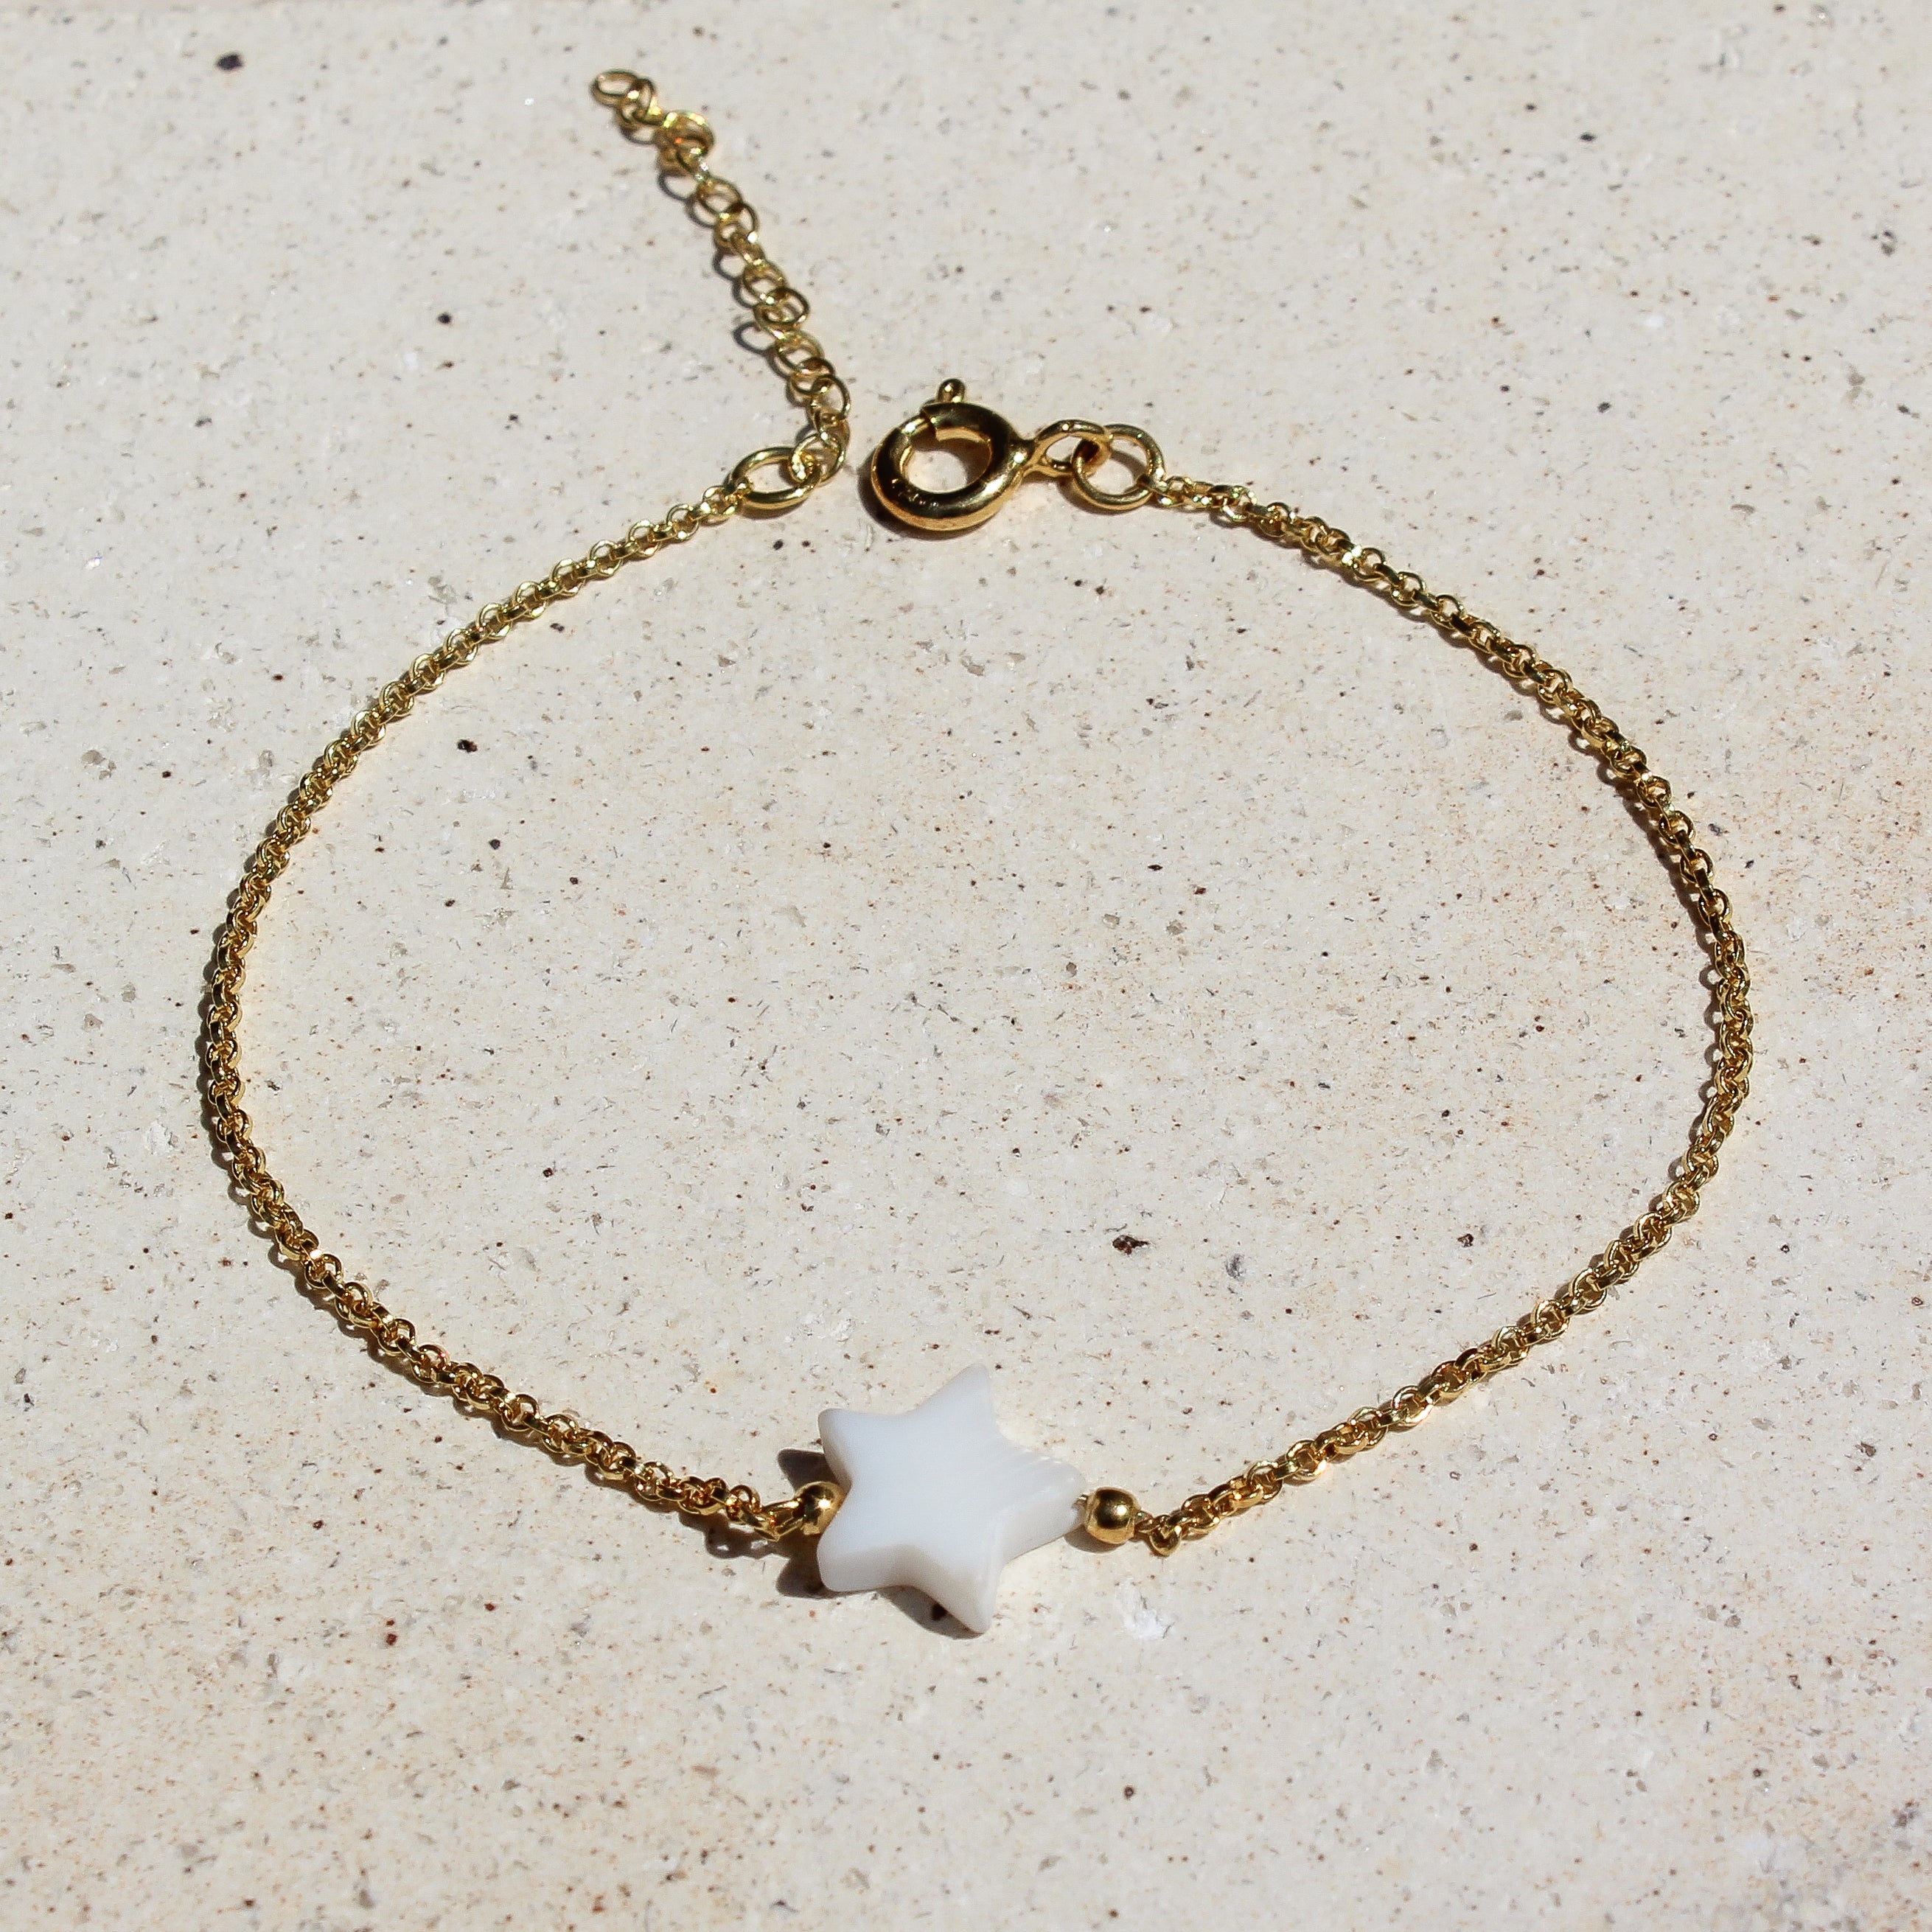 MAGIC STAR BRACELET - MOTHER OF PEARL (GOLD PLATED)